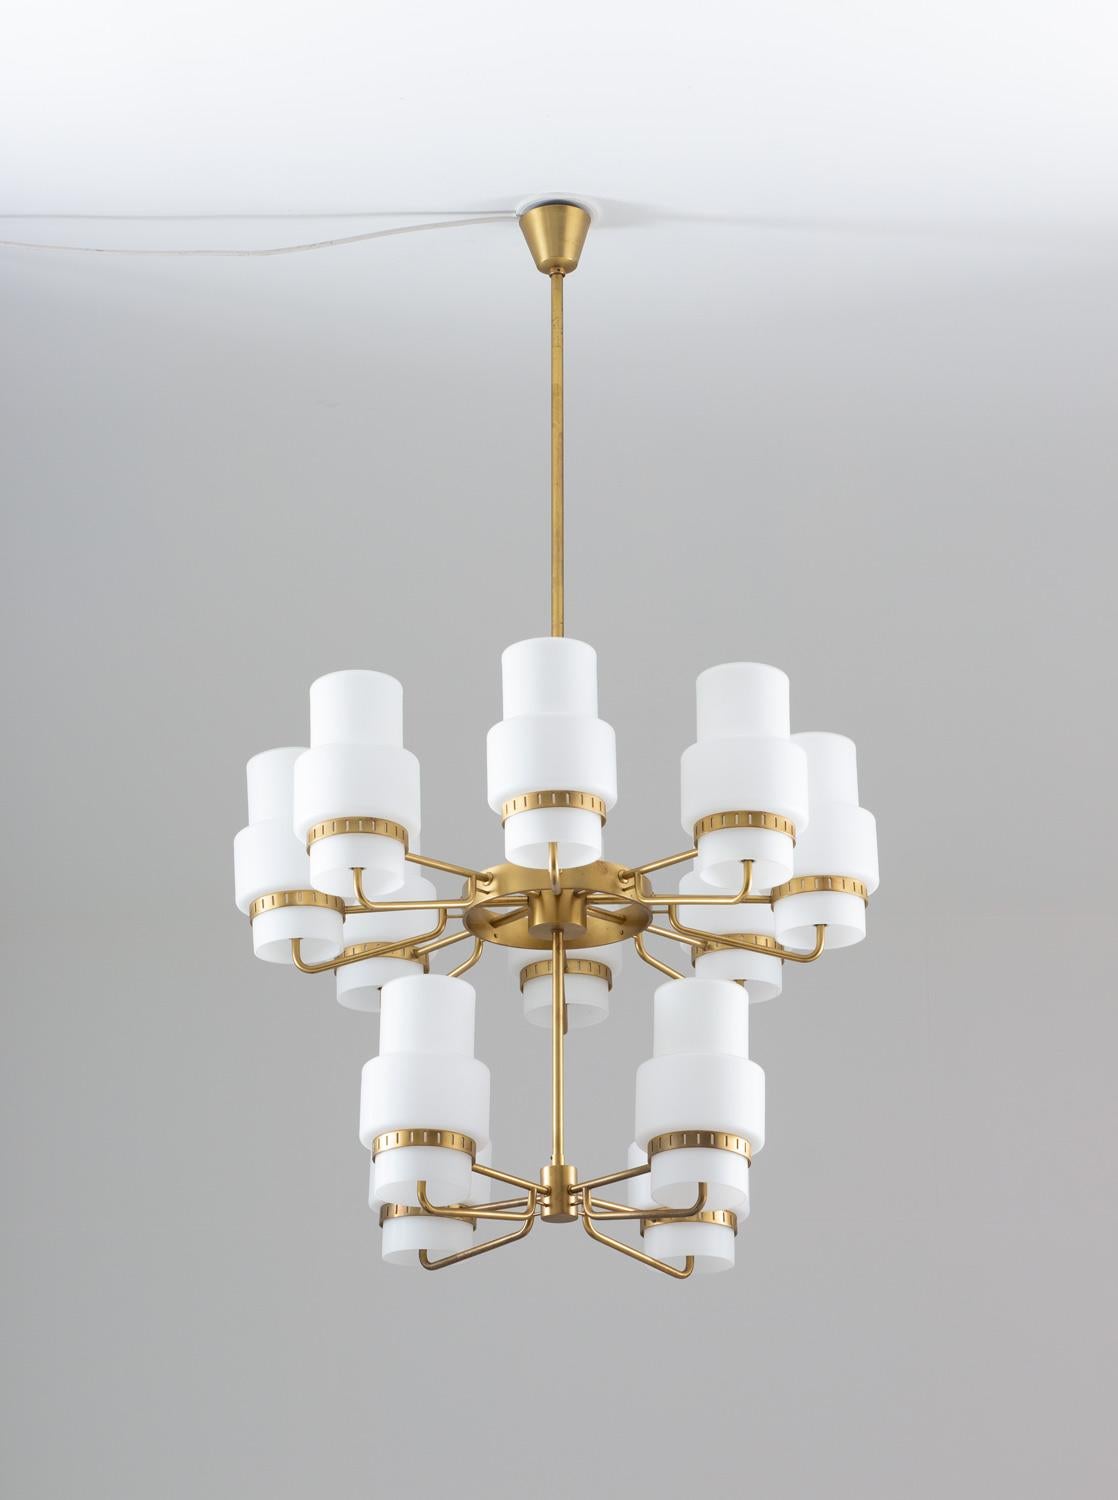 Stunning chandeliers in brass and frosted opaline glass, possibly manufactured by ASEA, Sweden, 1940s.
These majestic lamps give a soft, atmospheric light due to the opaline glass shades. 
Measure: The height of the brass stem can be altered